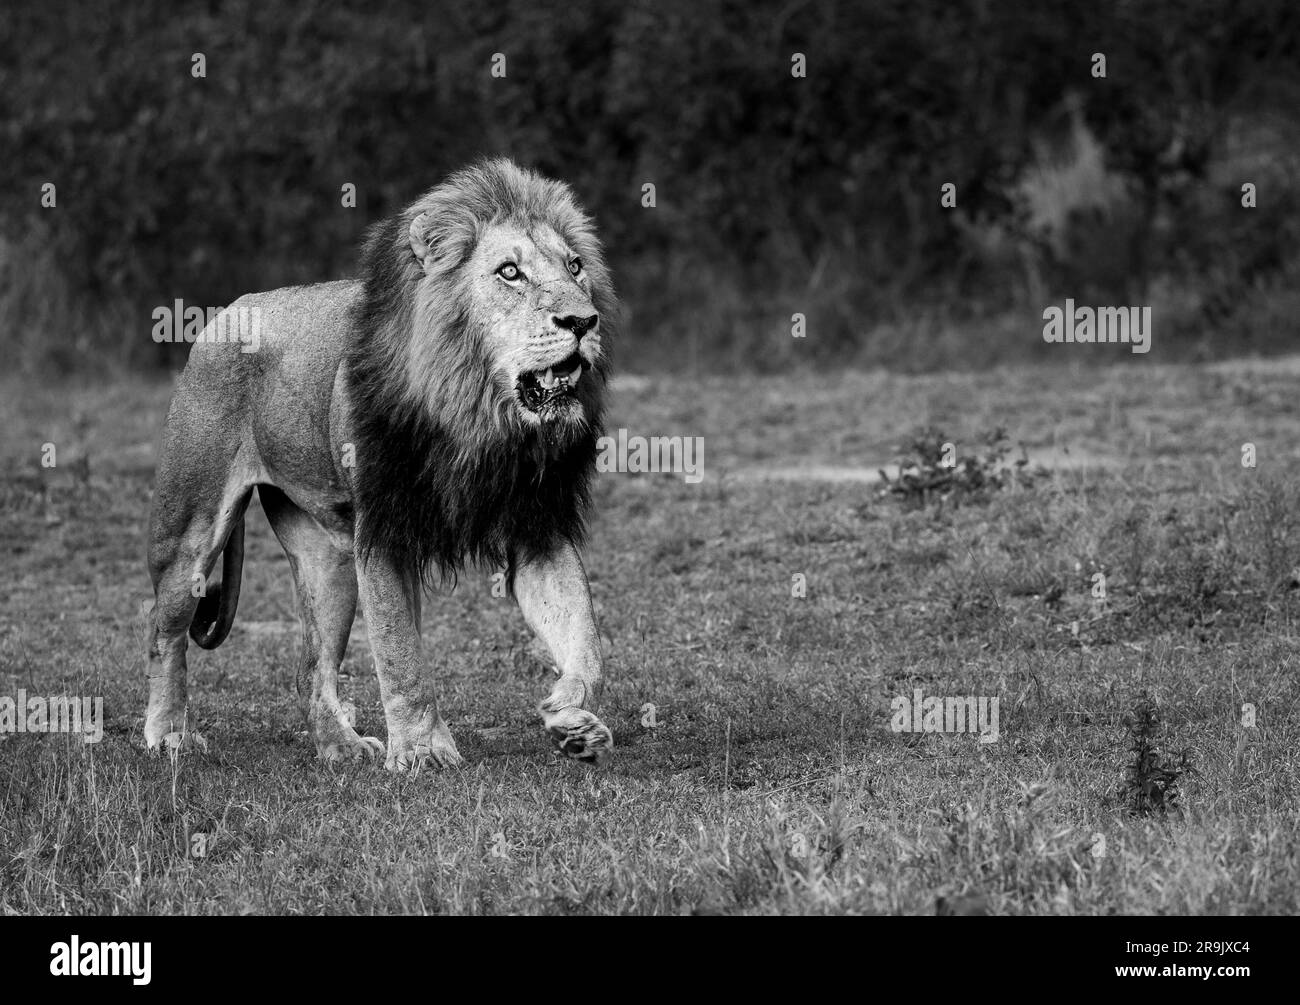 A male Lion, Panthera leo, walking, in black and white. Stock Photo